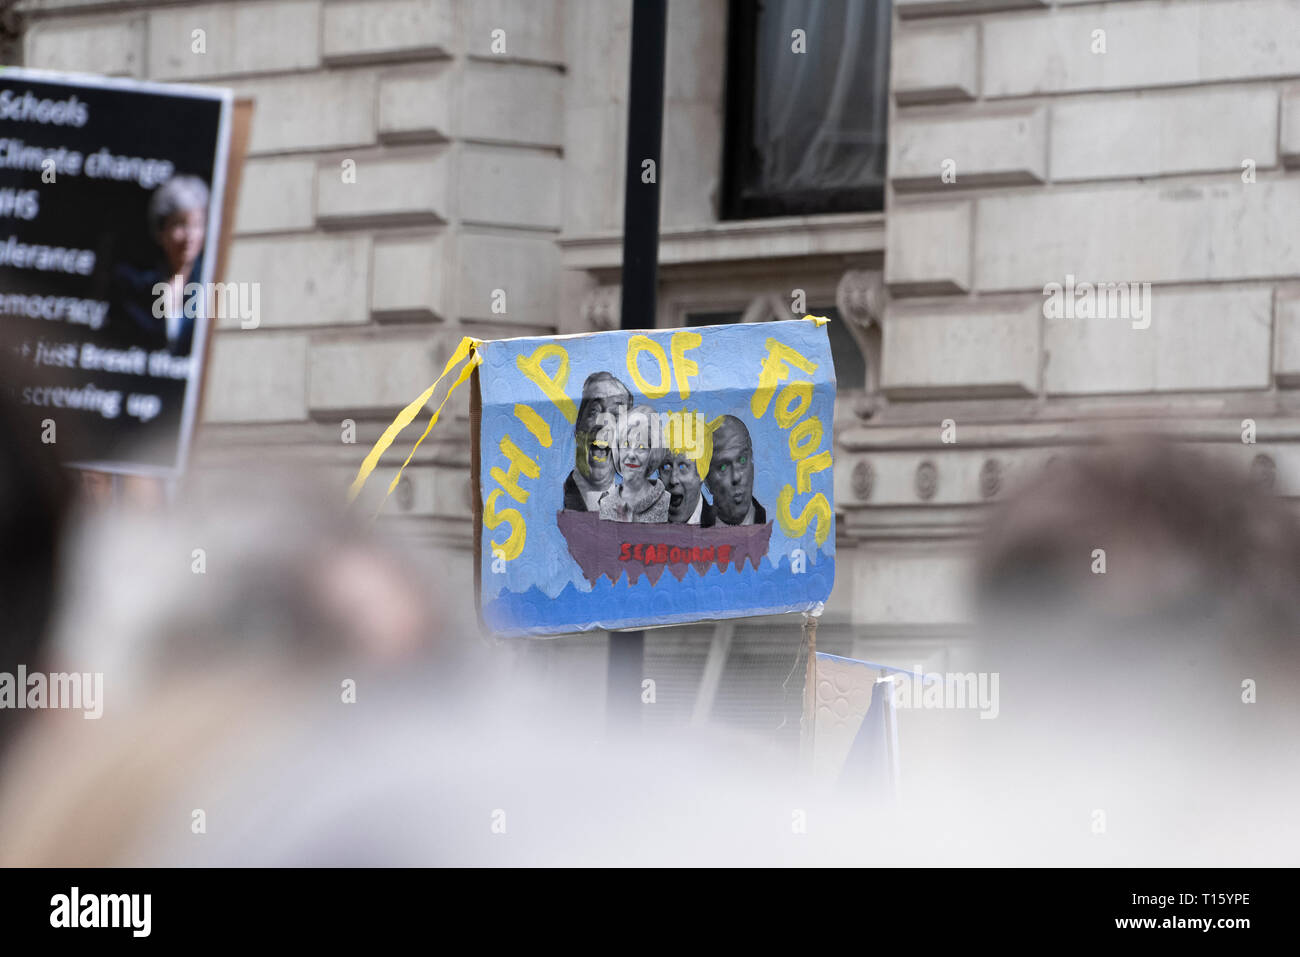 London, UK. 23rd Mar, 2019. Peoples Vote March, Ship of fools placard. Crowd detail and banners as taken from the perspective of a protester. Remain banners, second referendum. Credit: Tony Pincham/Alamy Live News Stock Photo